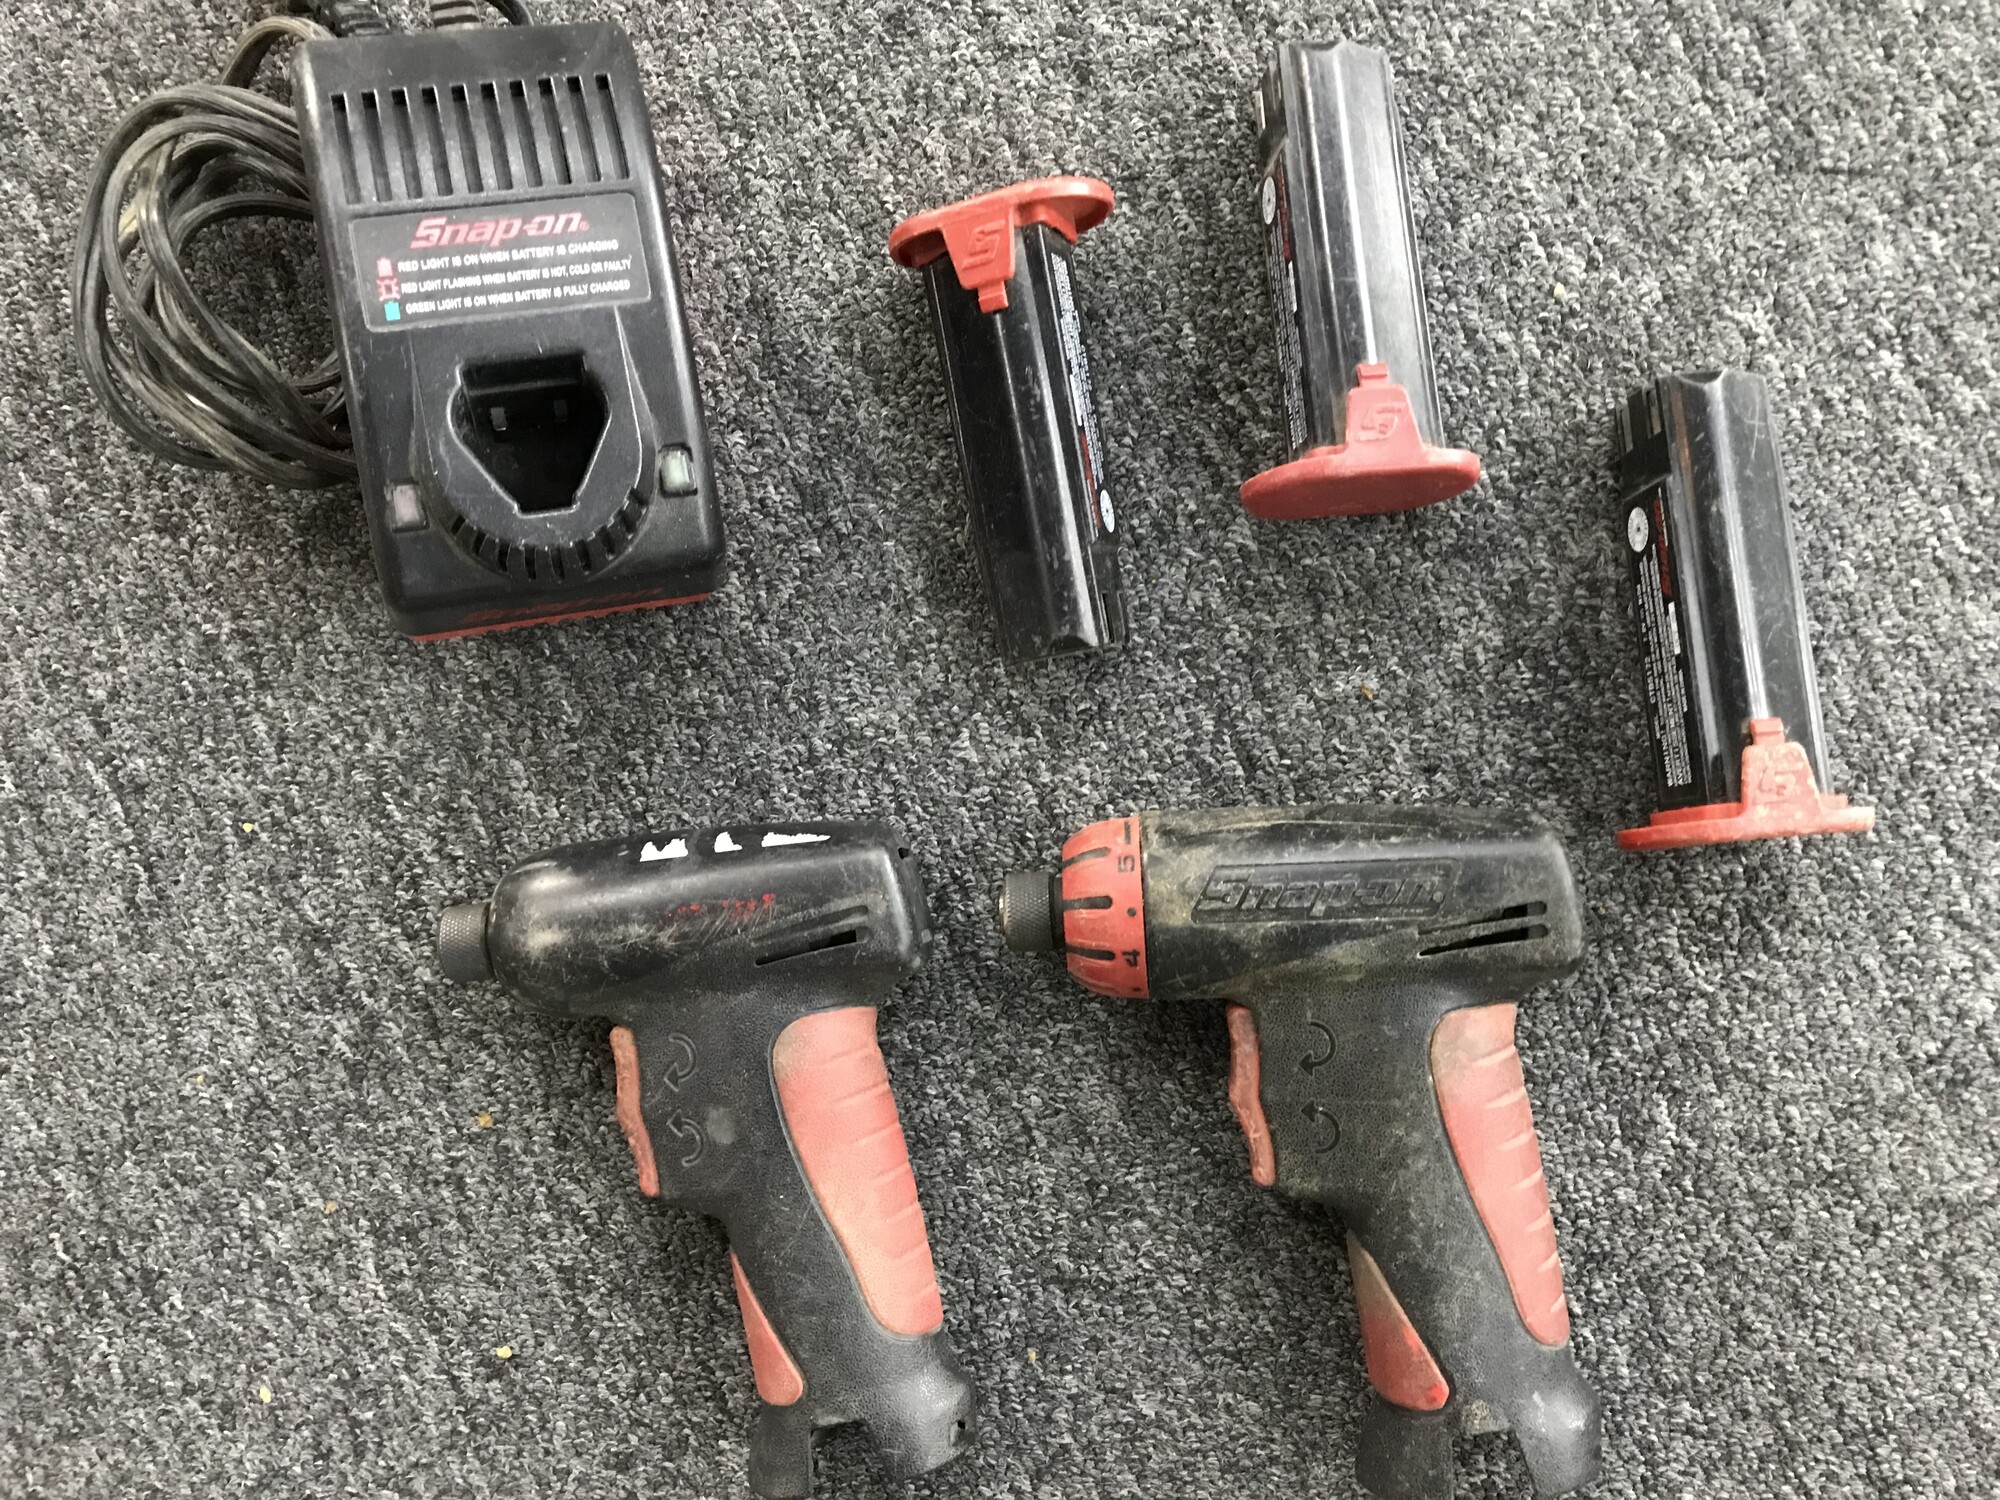 Cordless Driver Set, Snap On, Snap On Impact CTS561cl ,CT561 with 3 batteries  & charger